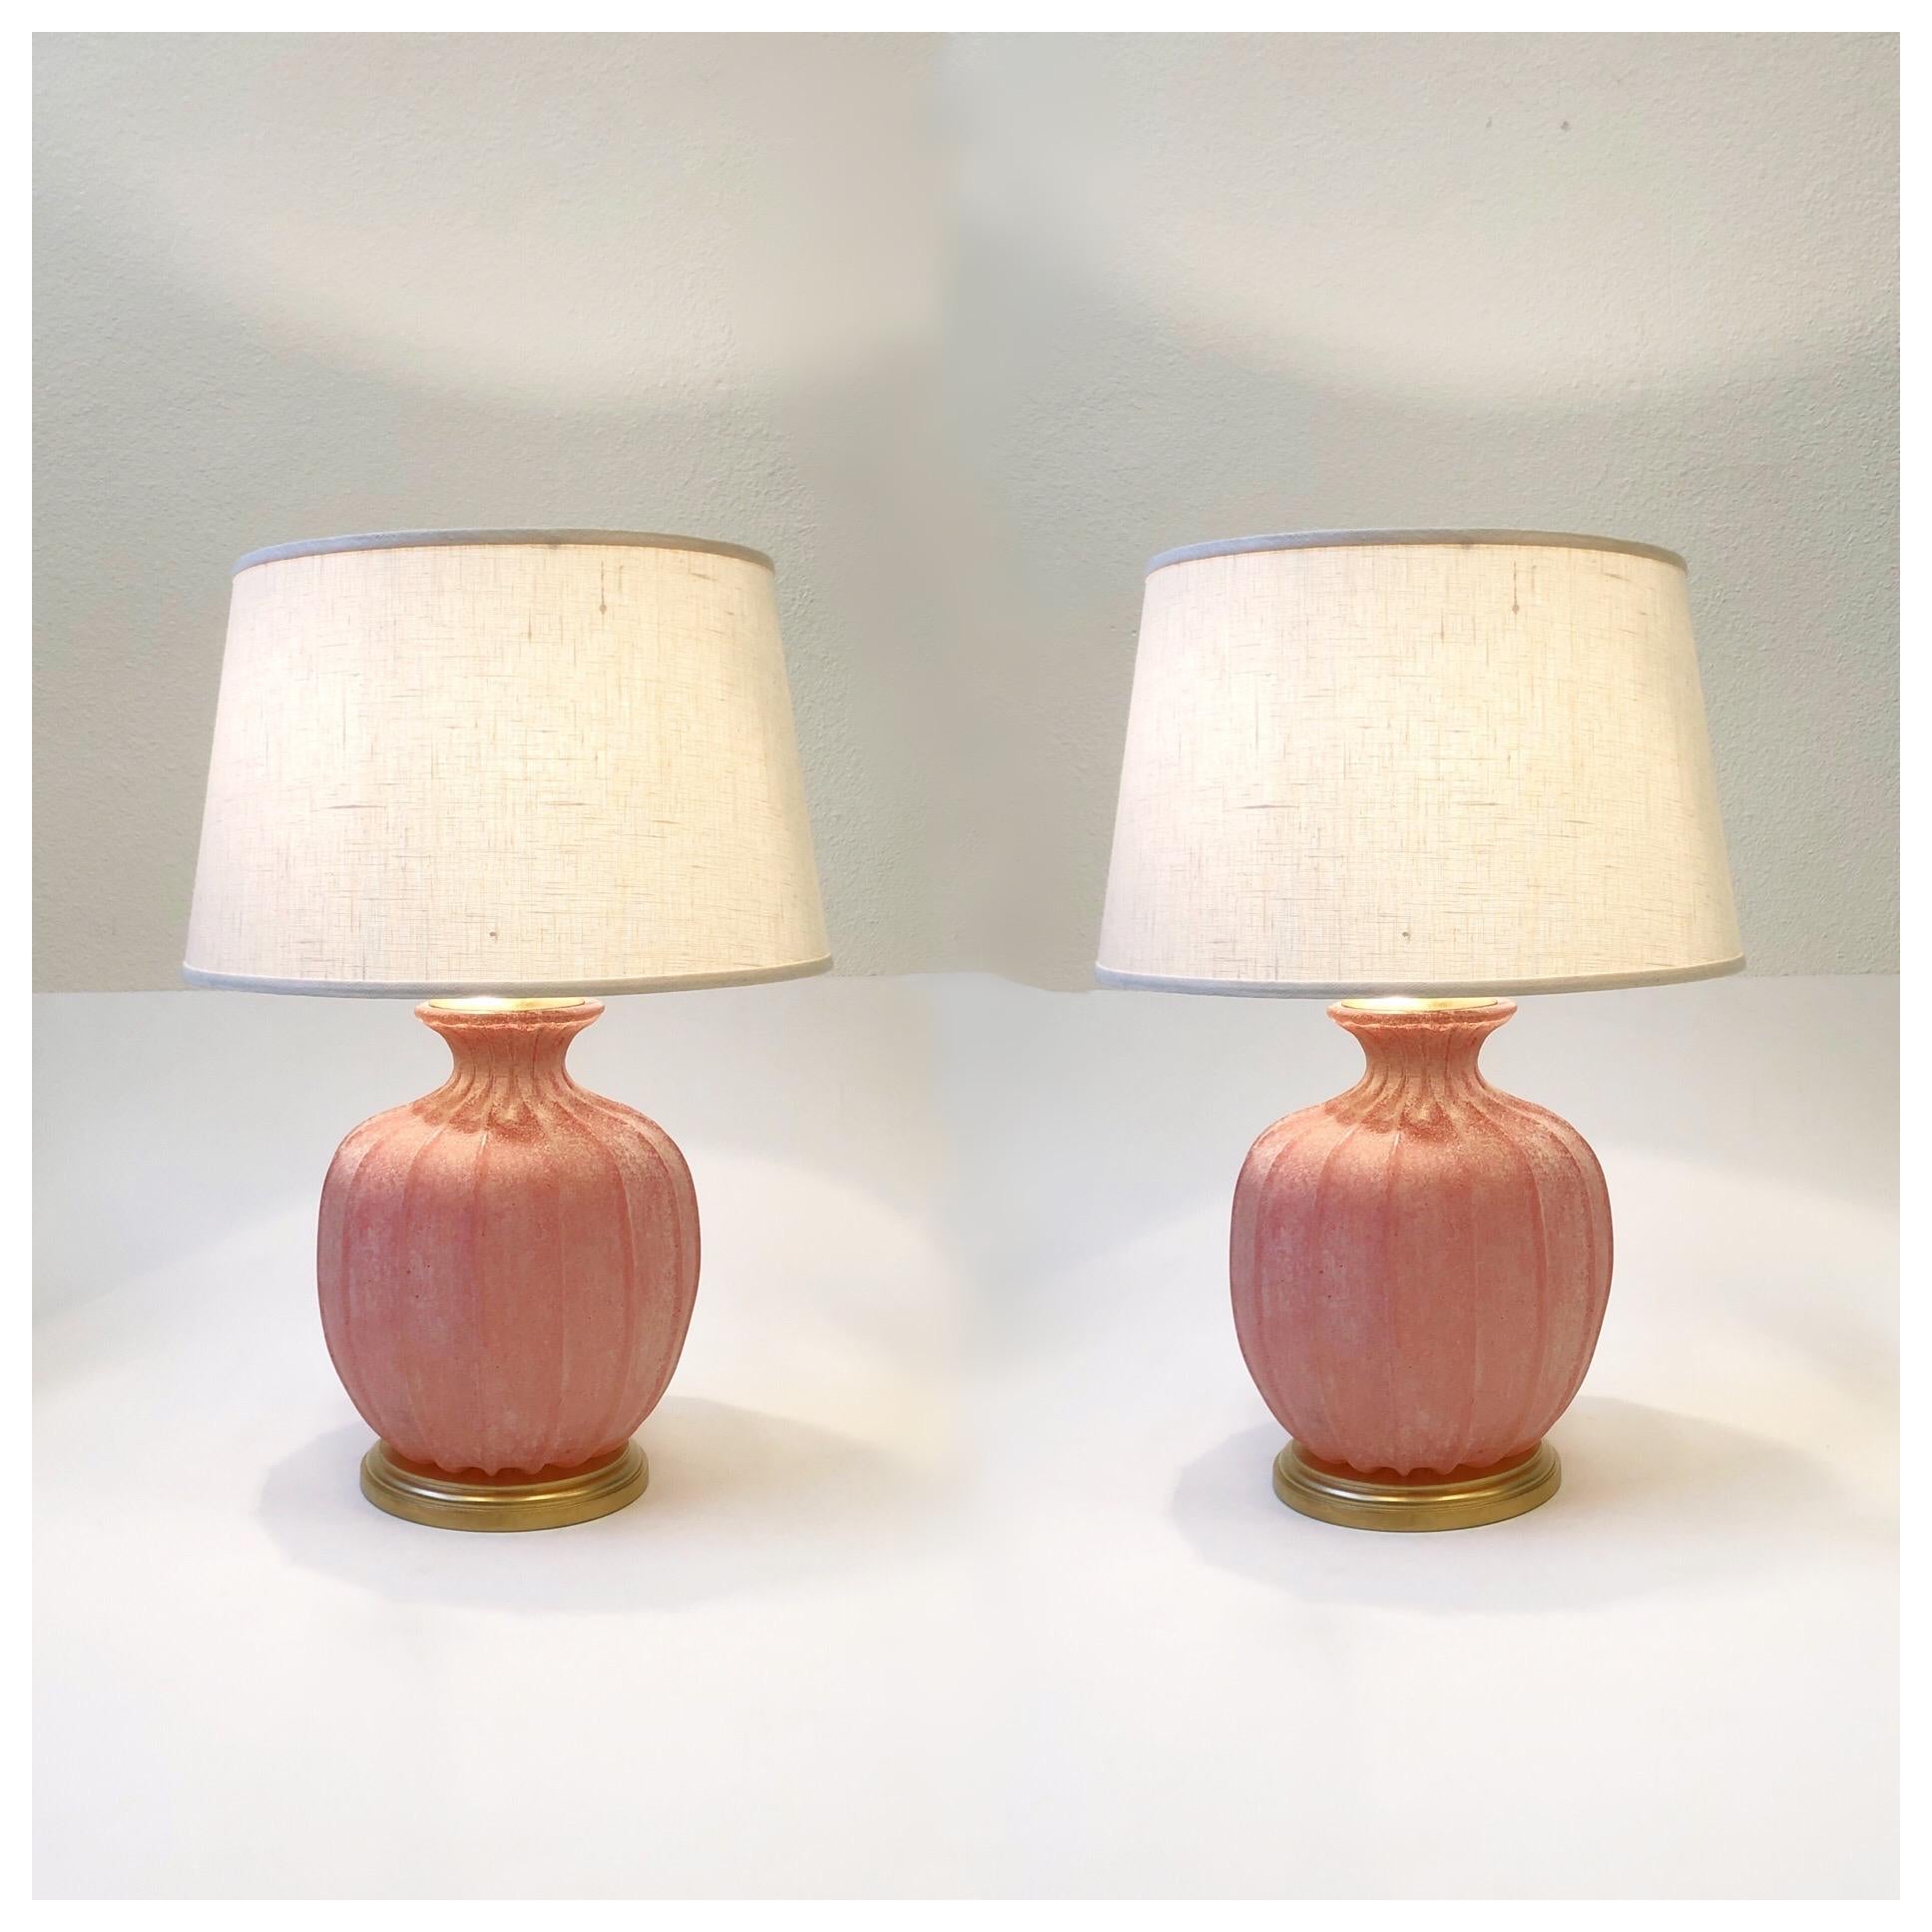 A pair of 1970s Italian pink Scavo Murano glass and satin brass table lamps by Seguso Vetri d’Arte. The lamps have been newly rewired and have new vanilla linen shades. The hardware is satin brass and the base is gilded wood. Both lamps are signed